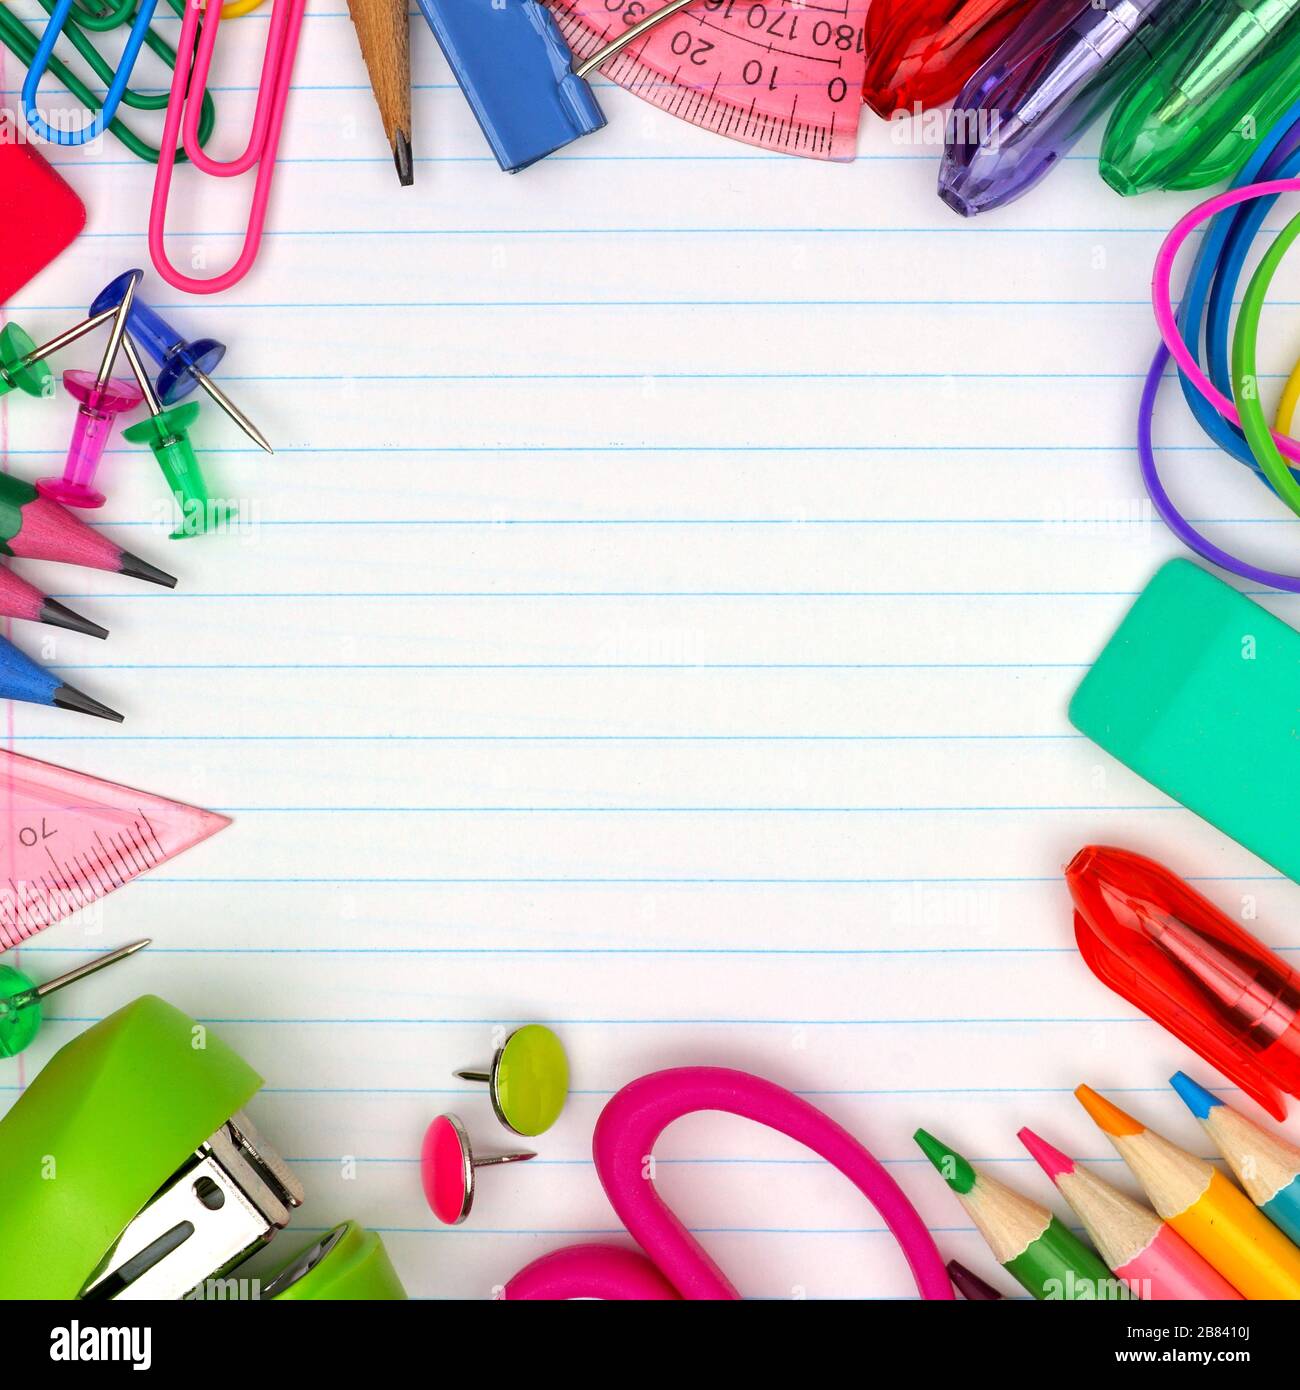 Colorful school supplies square frame over a lined paper background Stock Photo